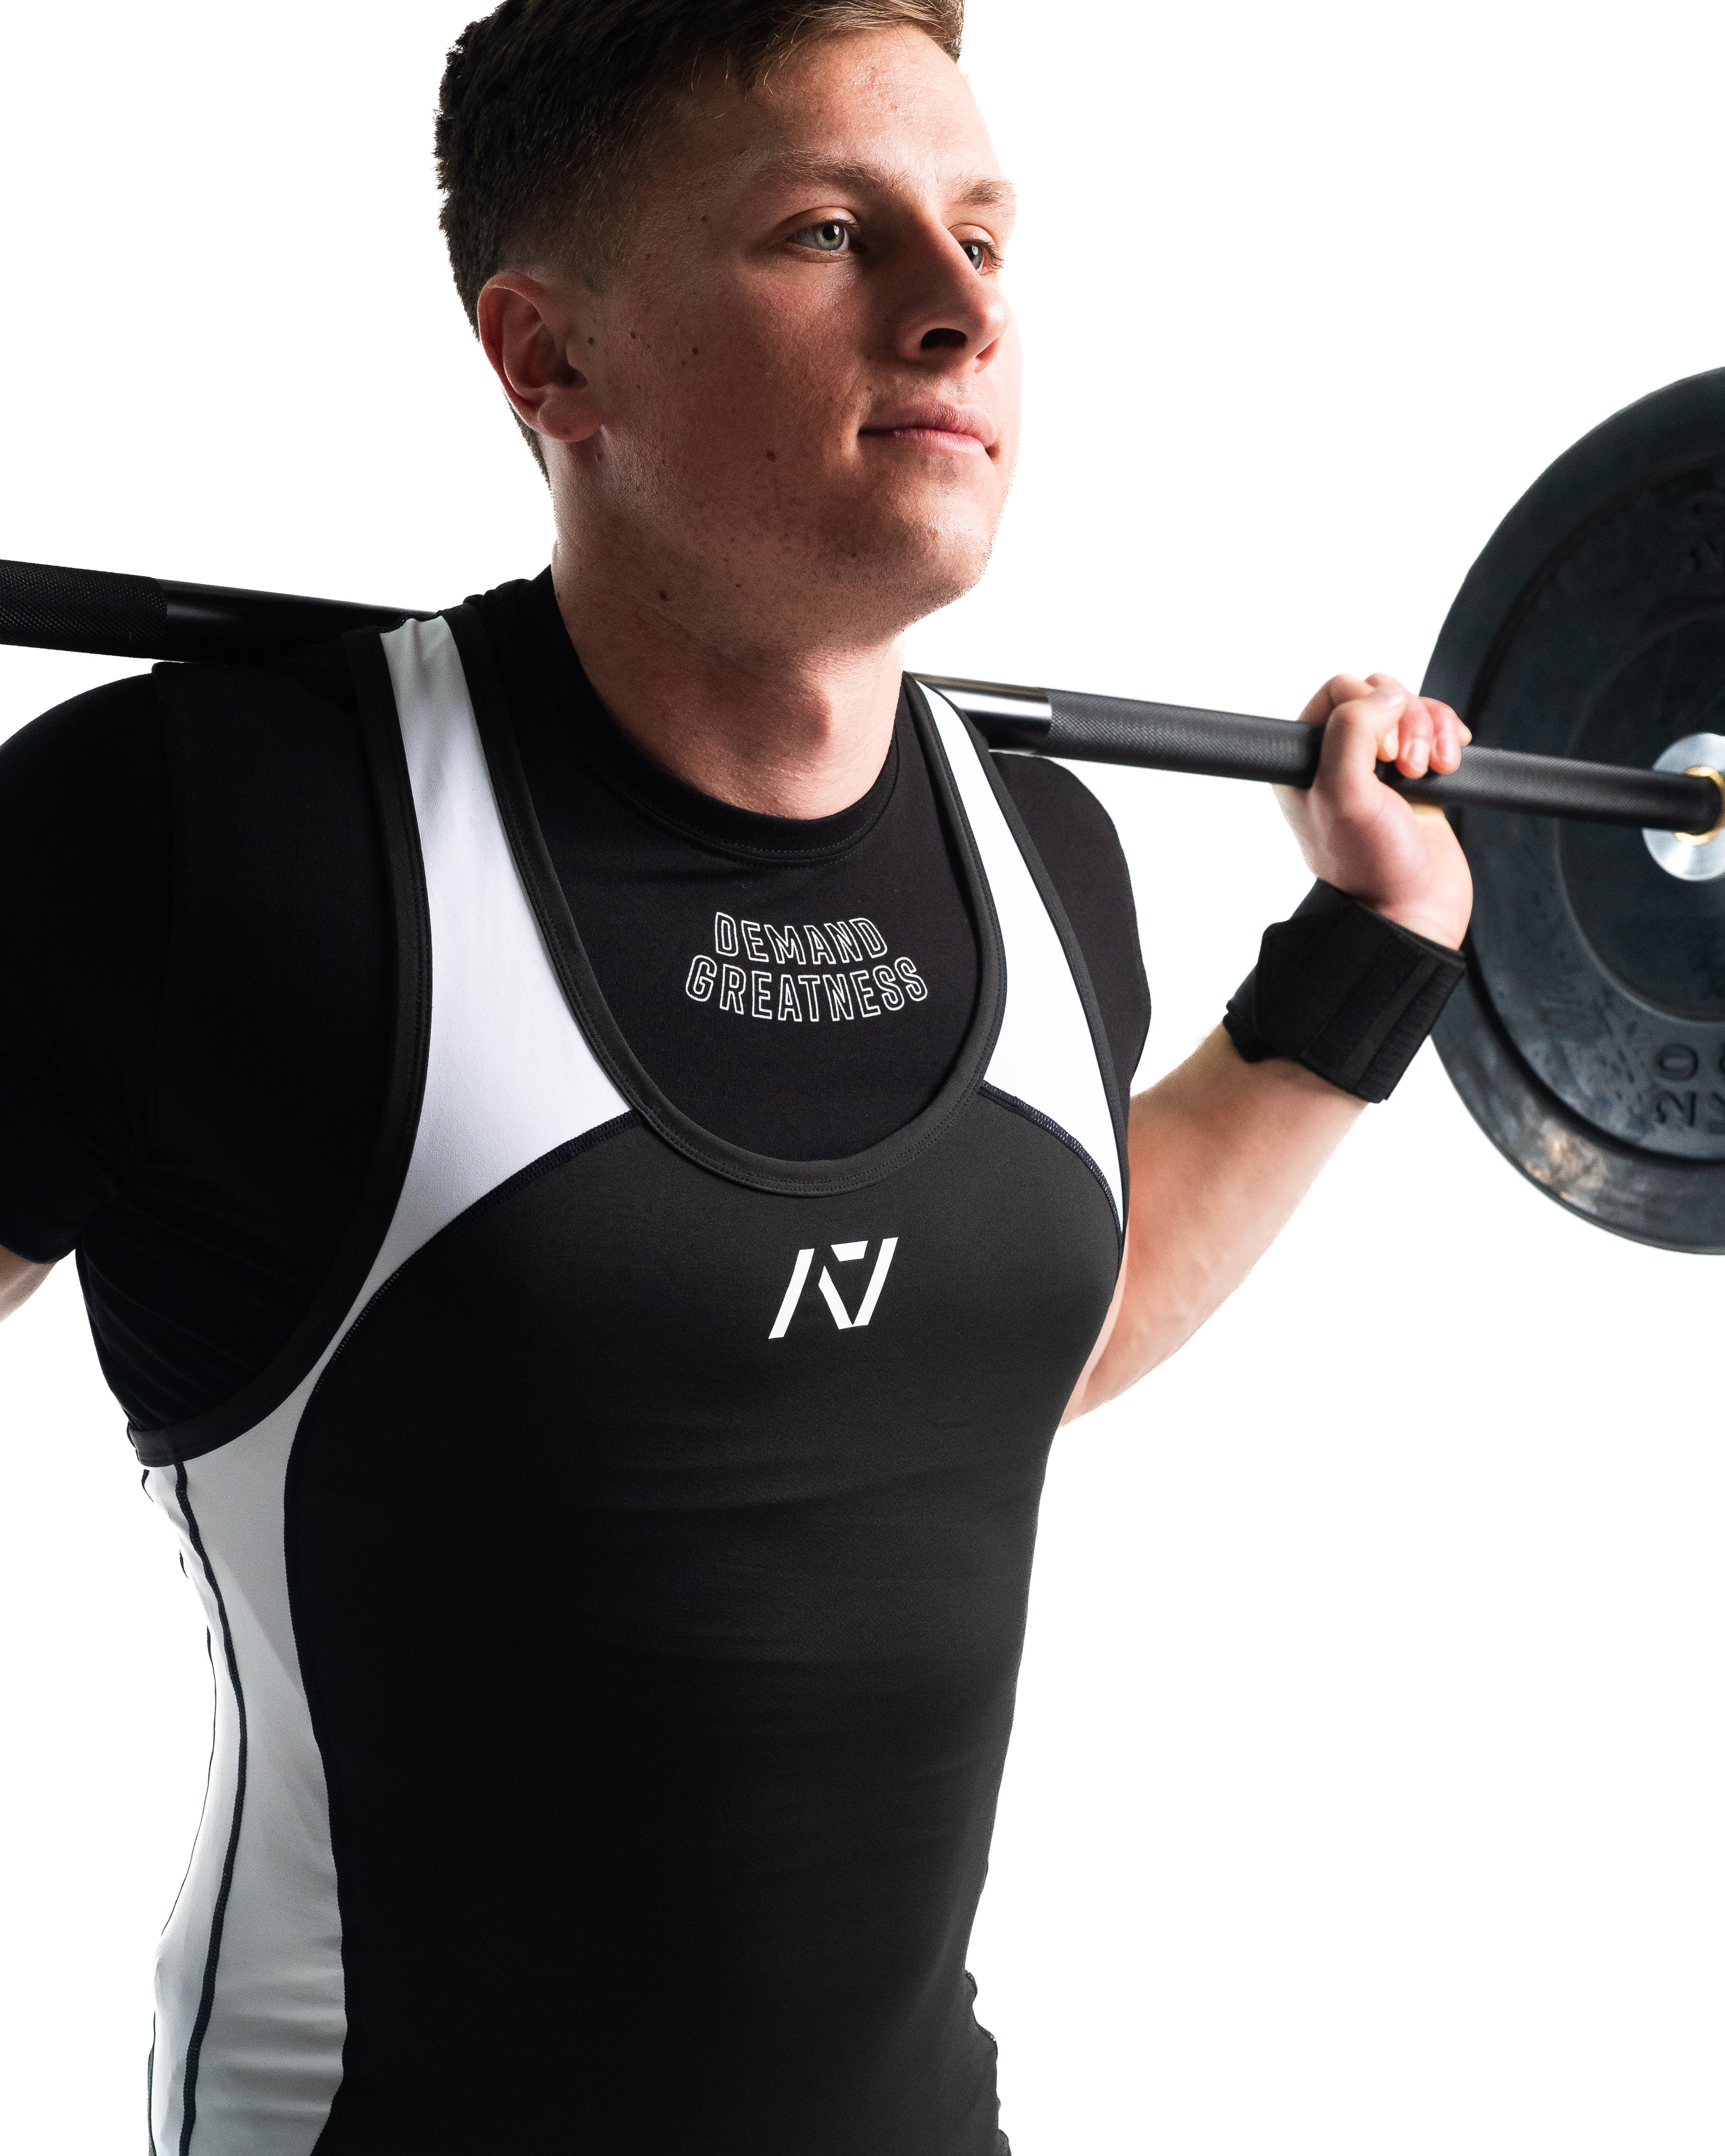 A7 IPF Approved Domino Luno singlet features extra lat mobility, side panel stitching to guide the squat depth level and curved panel design for a slimming look. The Women's cut singlet features a tapered waist and additional quad room. The IPF Approved Kit includes Luno Powerlifting Singlet, A7 Meet Shirt, A7 Zebra Wrist Wraps, A7 Deadlift Socks, Hourglass Knee Sleeves (Stiff Knee Sleeves and Rigor Mortis Knee Sleeves). All A7 Powerlifting Equipment shipping to UK, Norway, Switzerland and Iceland.